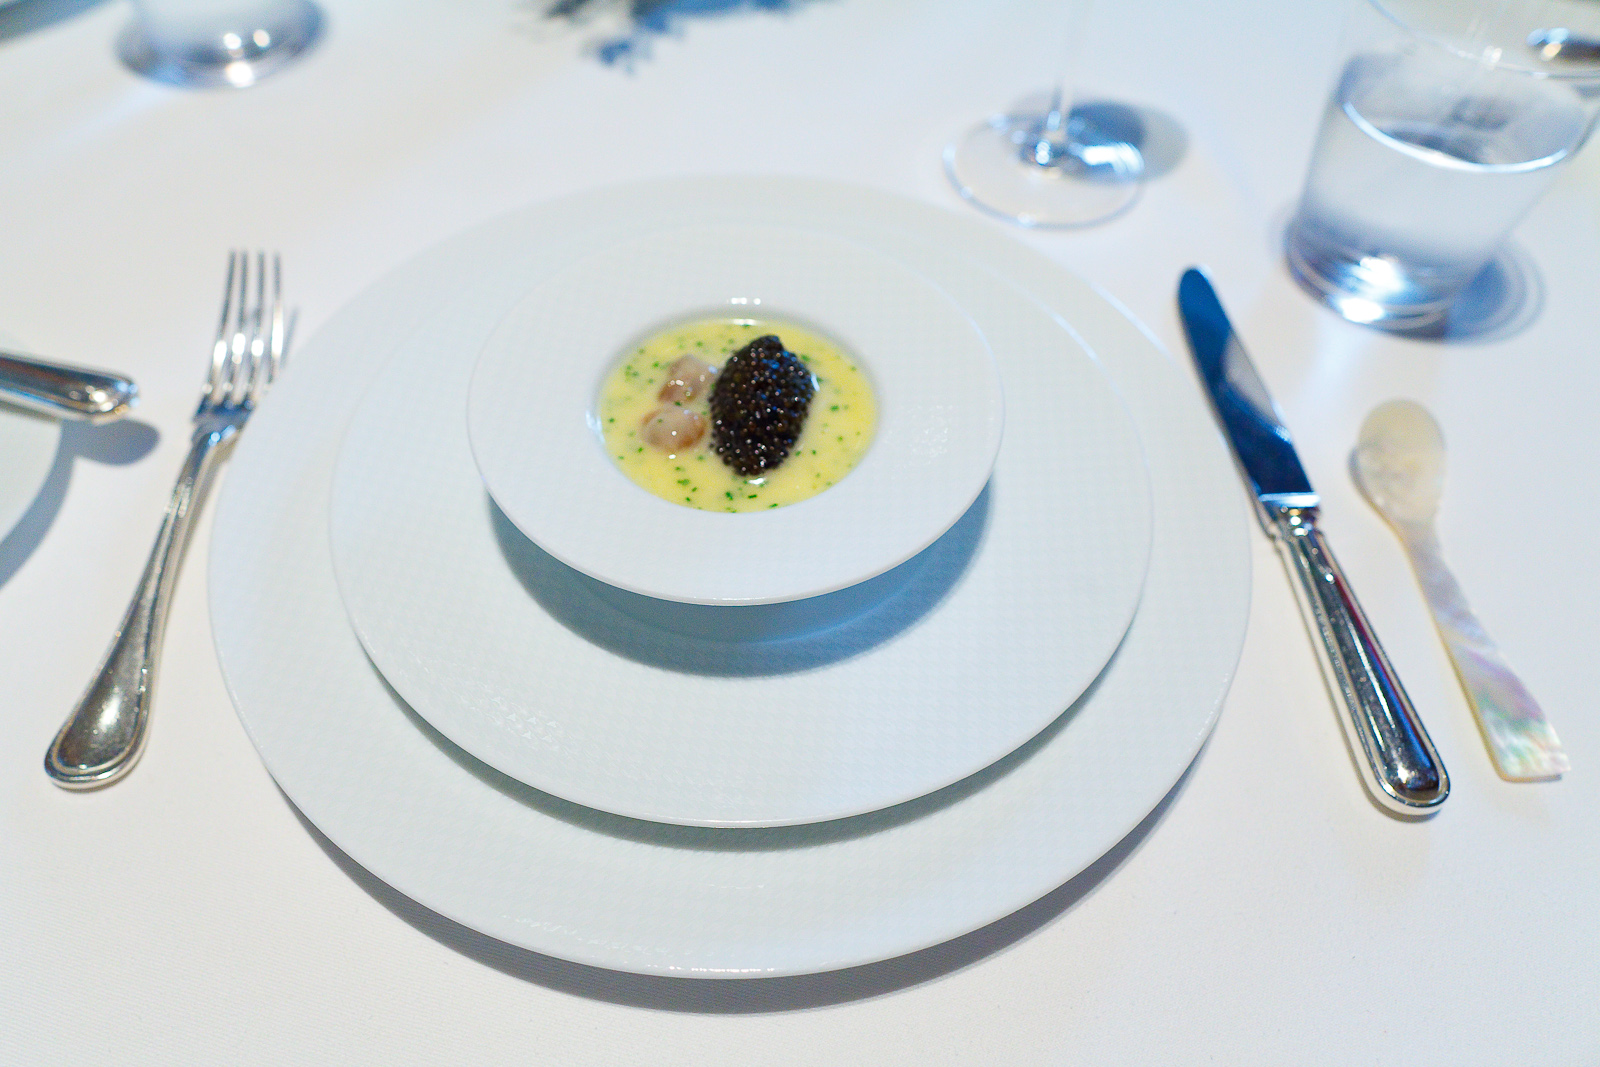 1st Course: "Oysters and Pearls" - “Sabayon” of Pearl Tapioca with Island Creek Oysters and White Sturgeon Caviar